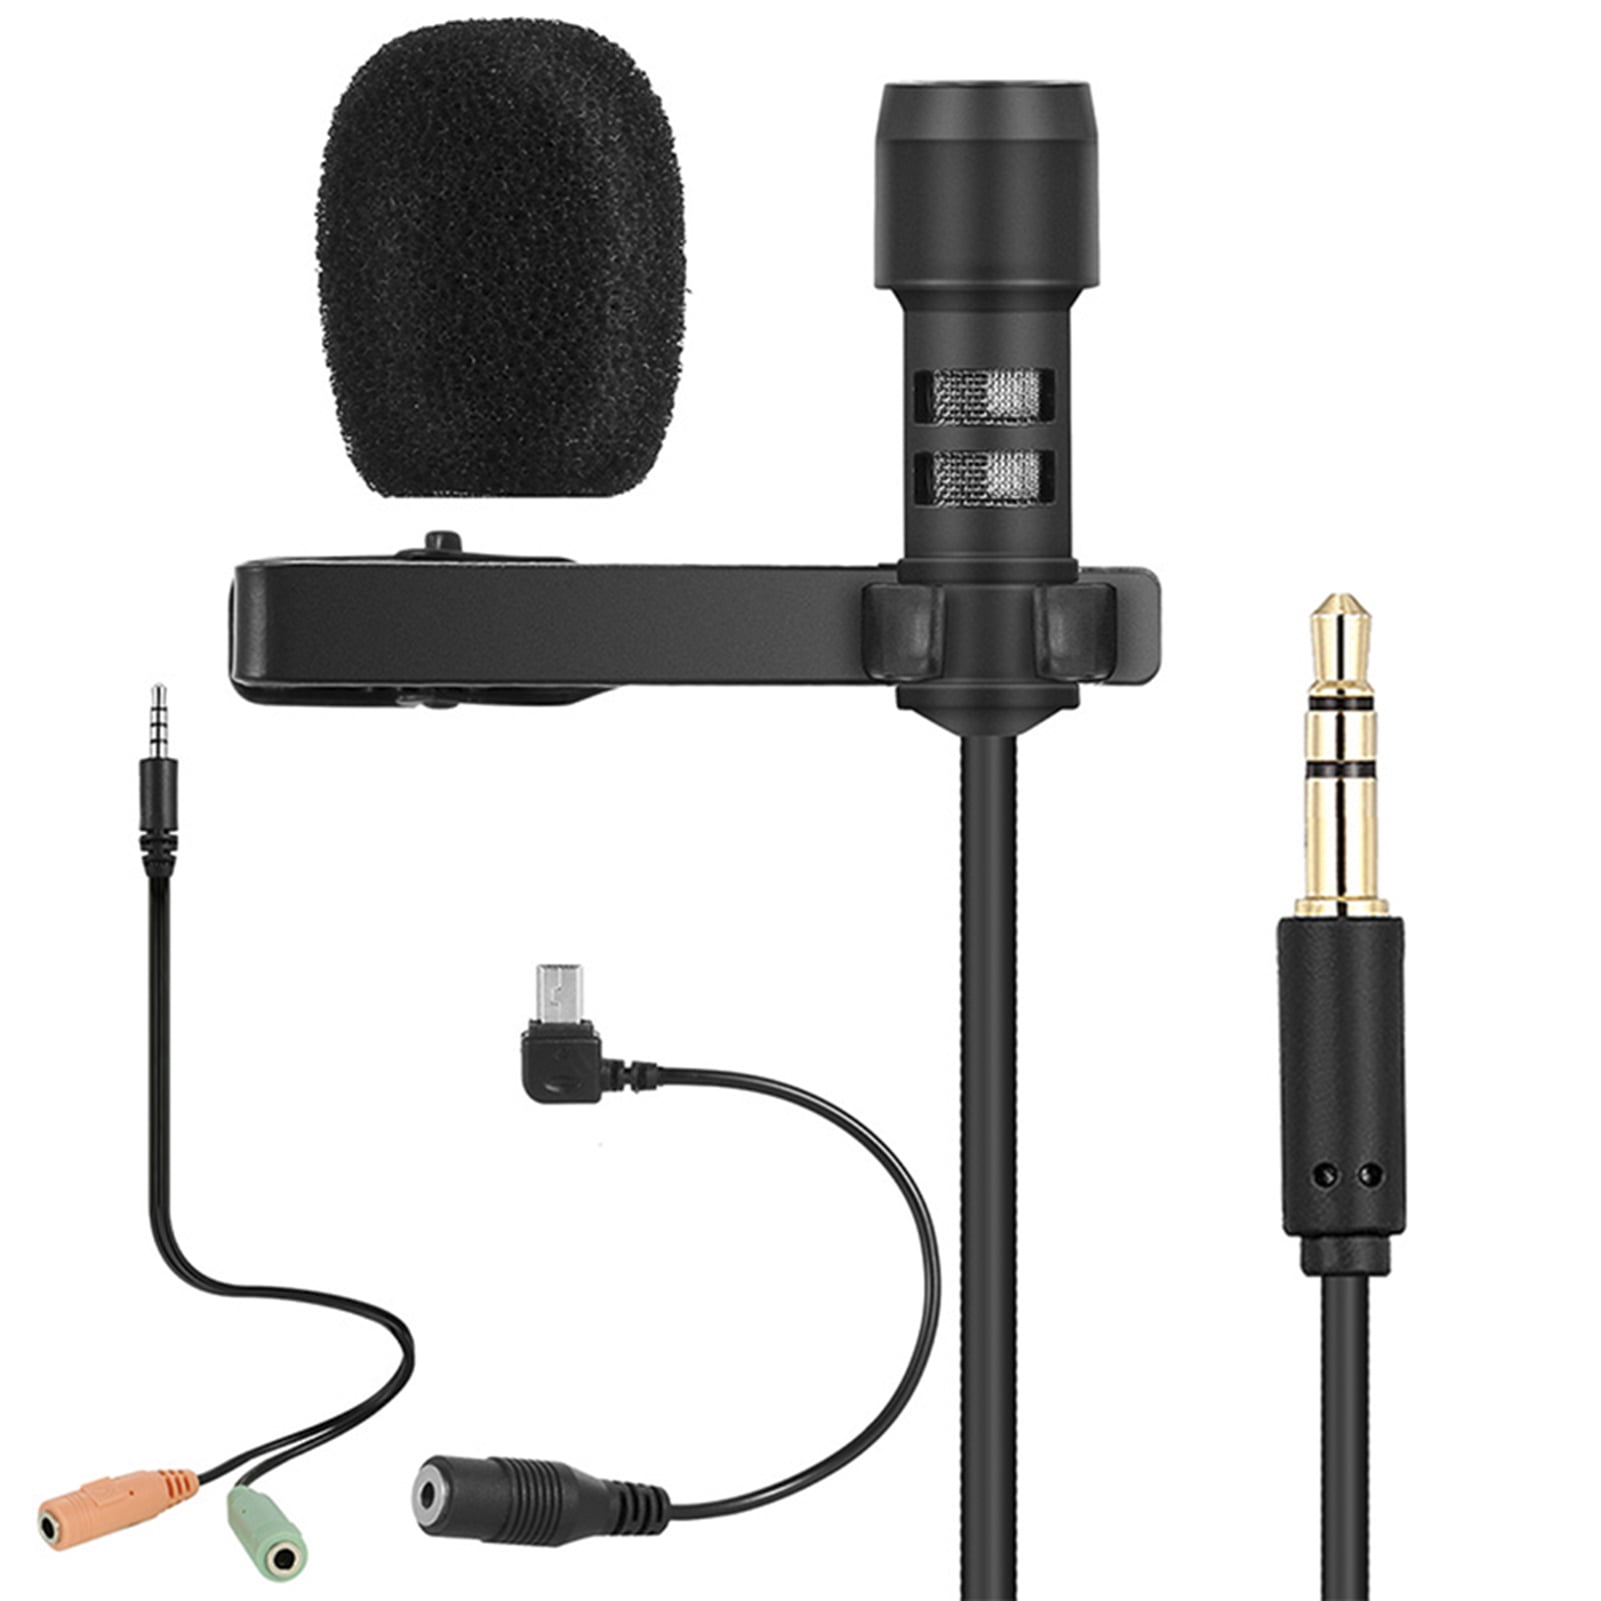 Instrument Microphone High Sensitivity Capacitive Microphone Lapel Mic Portable for Recording/Interview/Video Conference/Podcast 